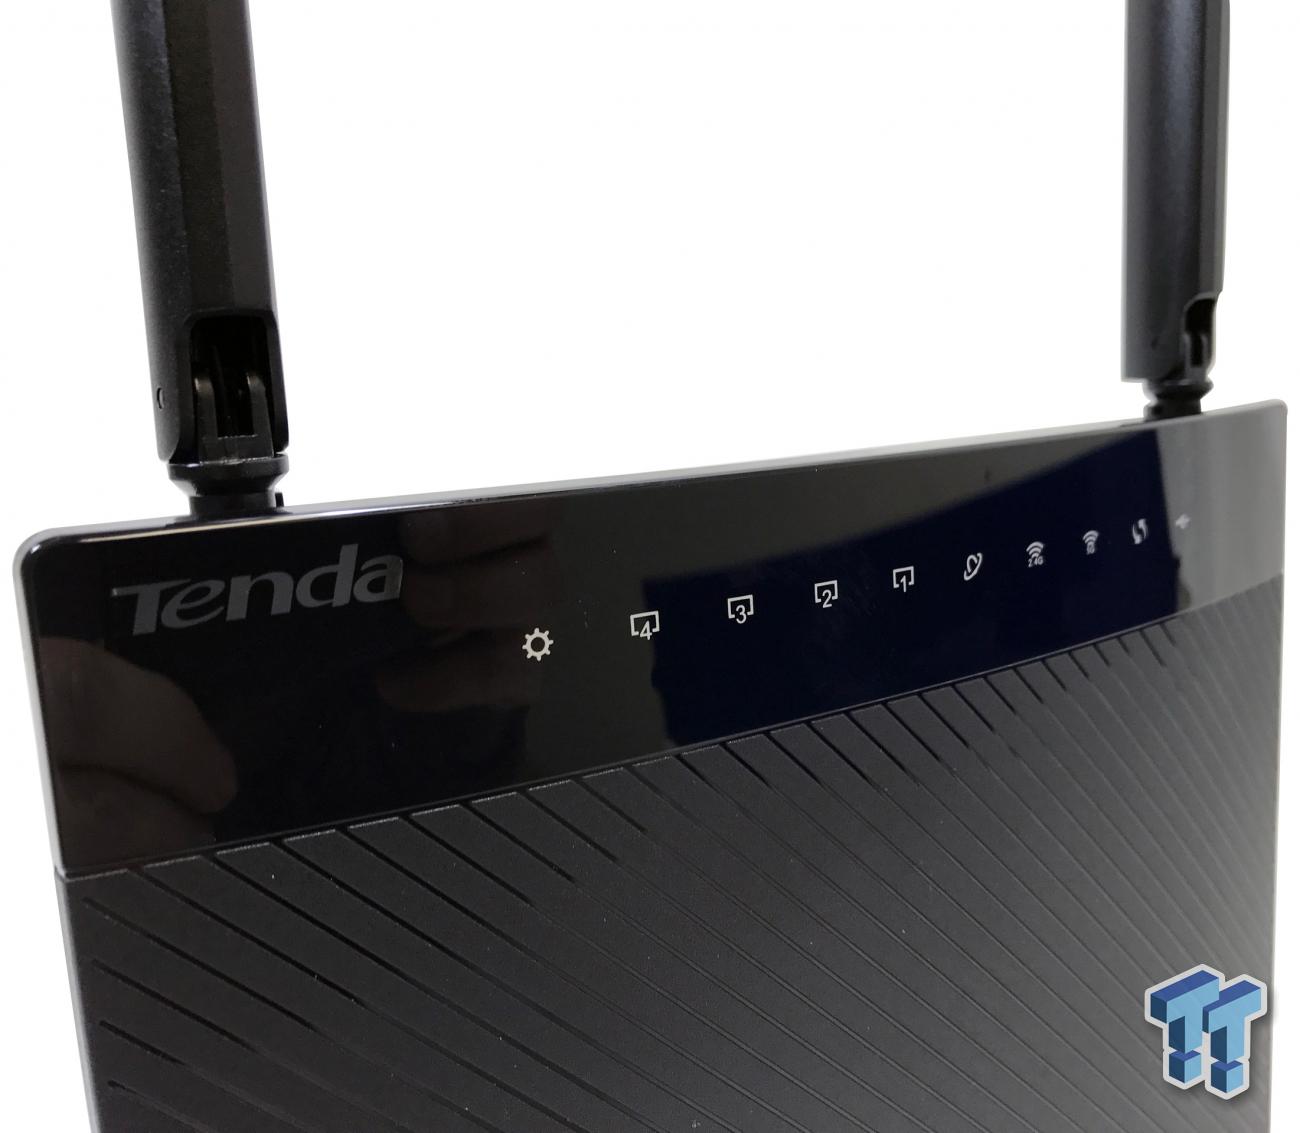 Tenda AC1200 Dual-Band Wireless Router Review |